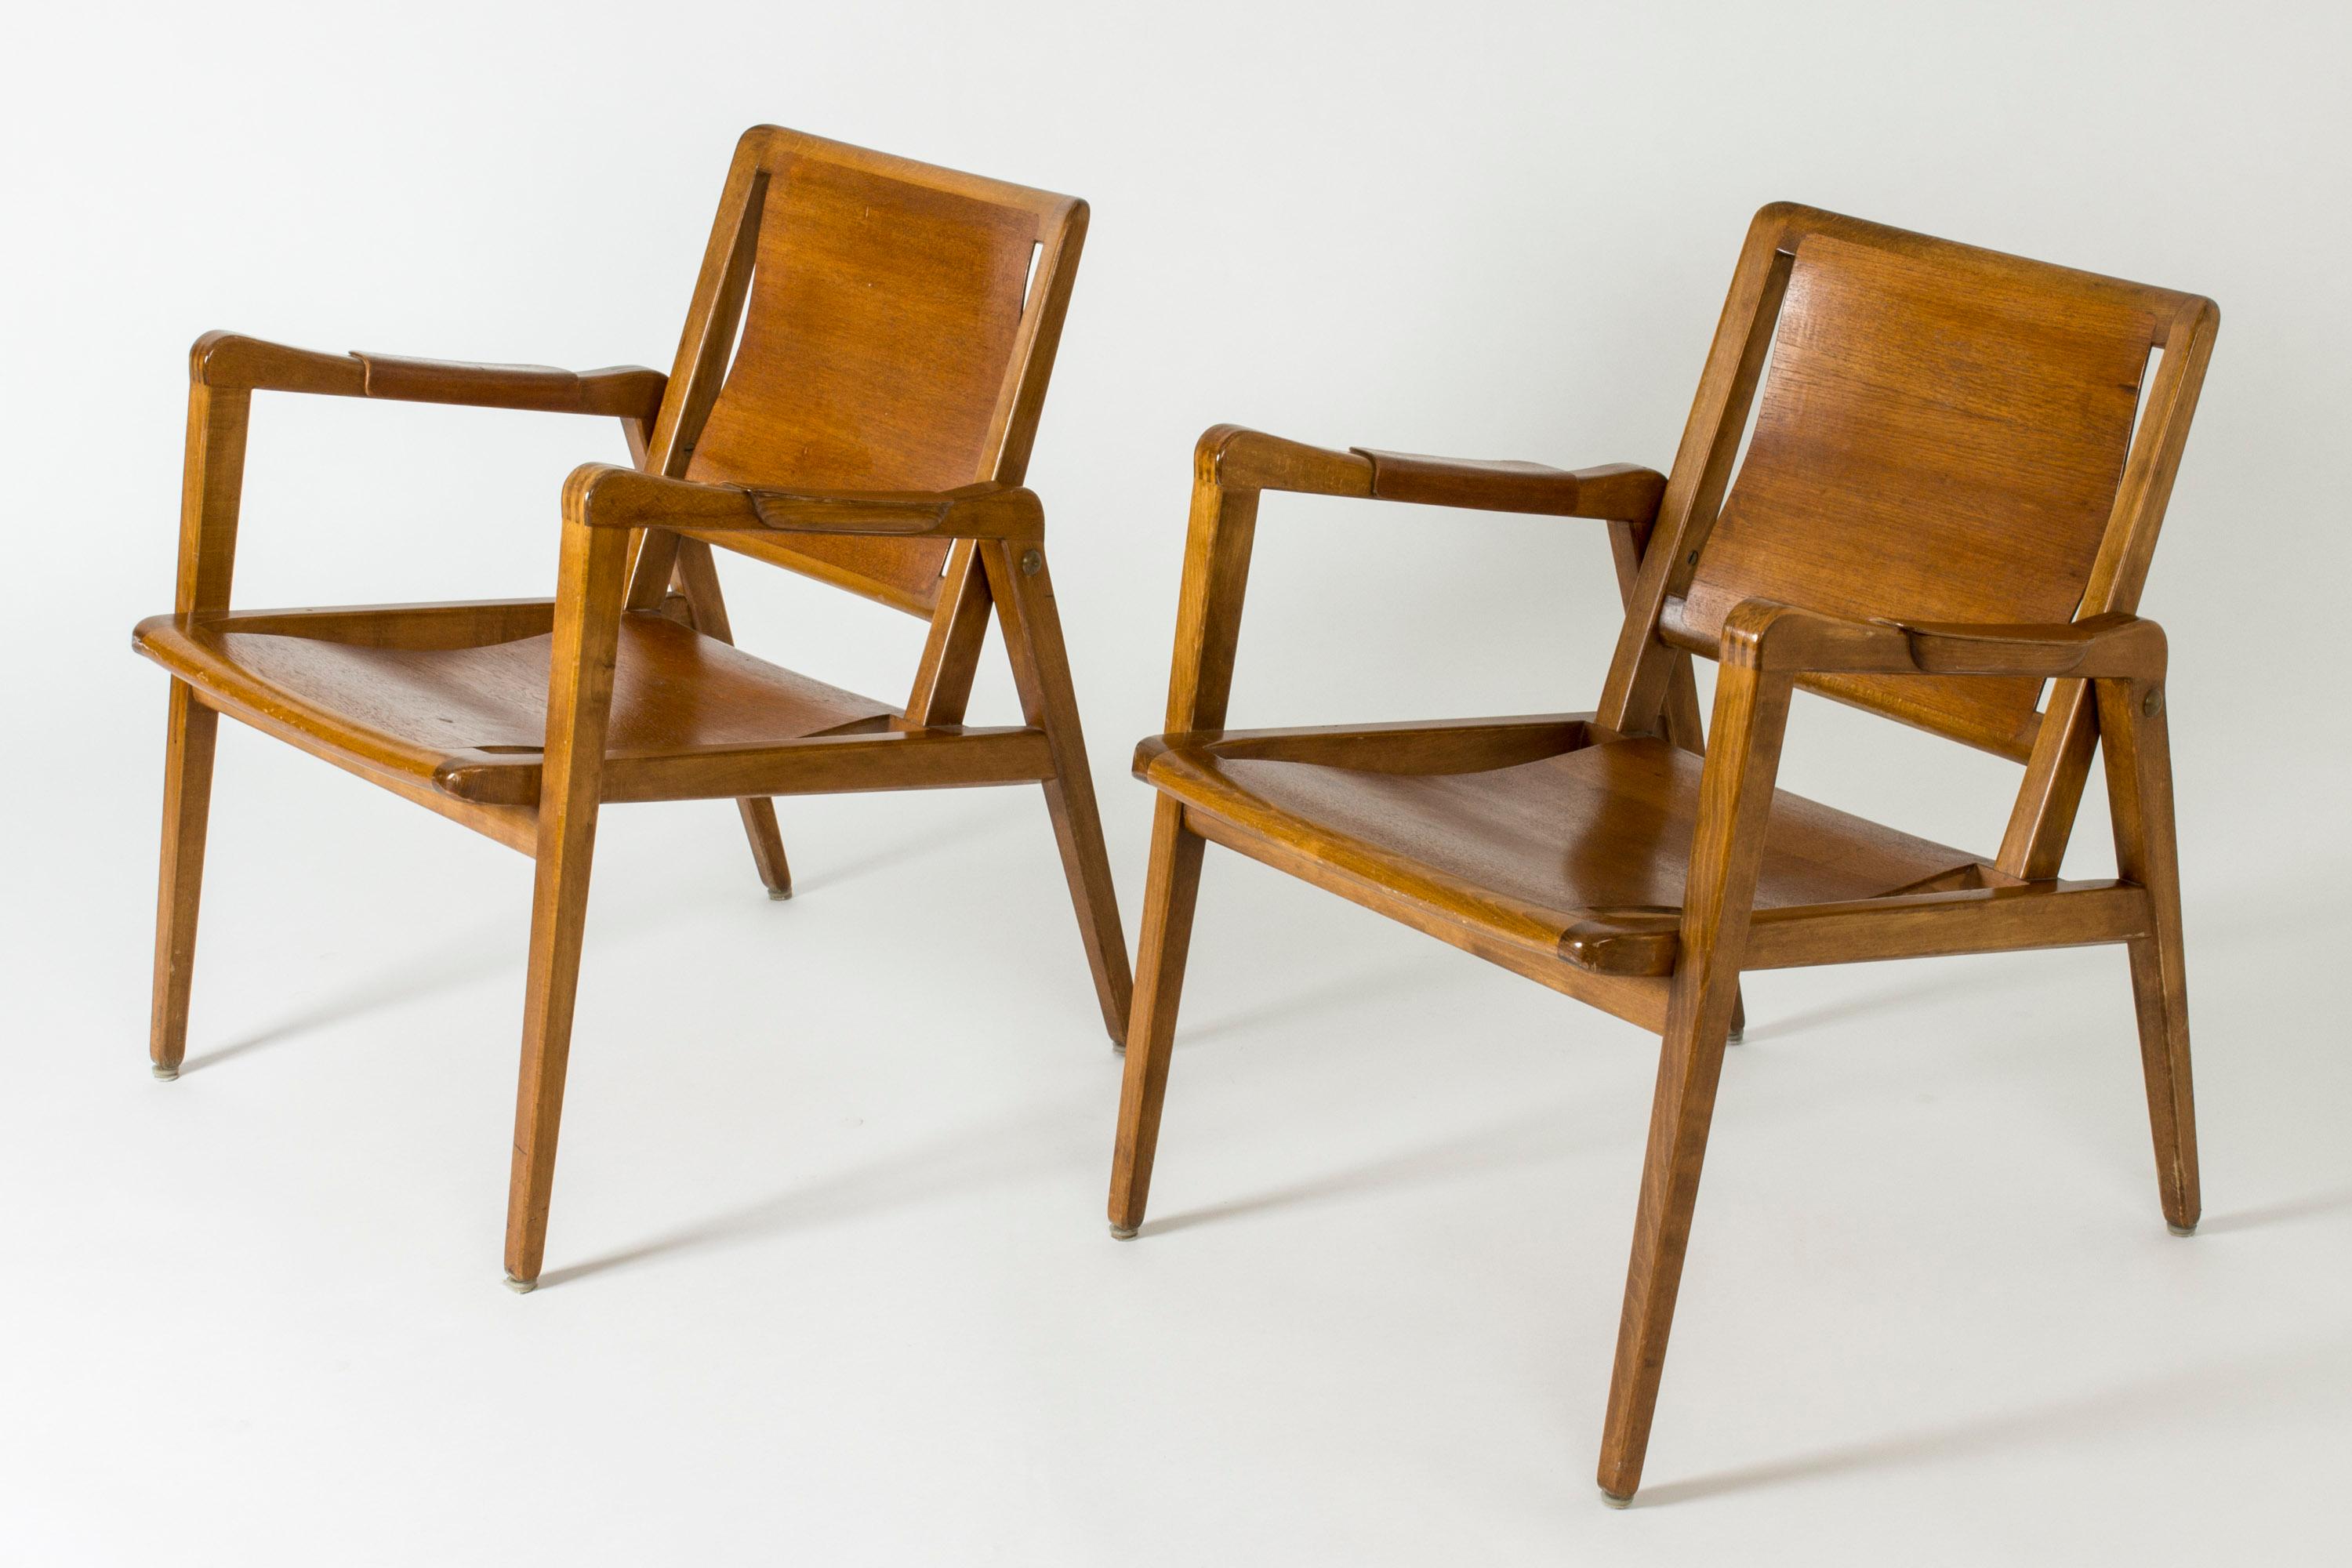 Scandinavian Modern Pair of Armchairs by Axel Larsson for Bodafors, Sweden, 1940s.